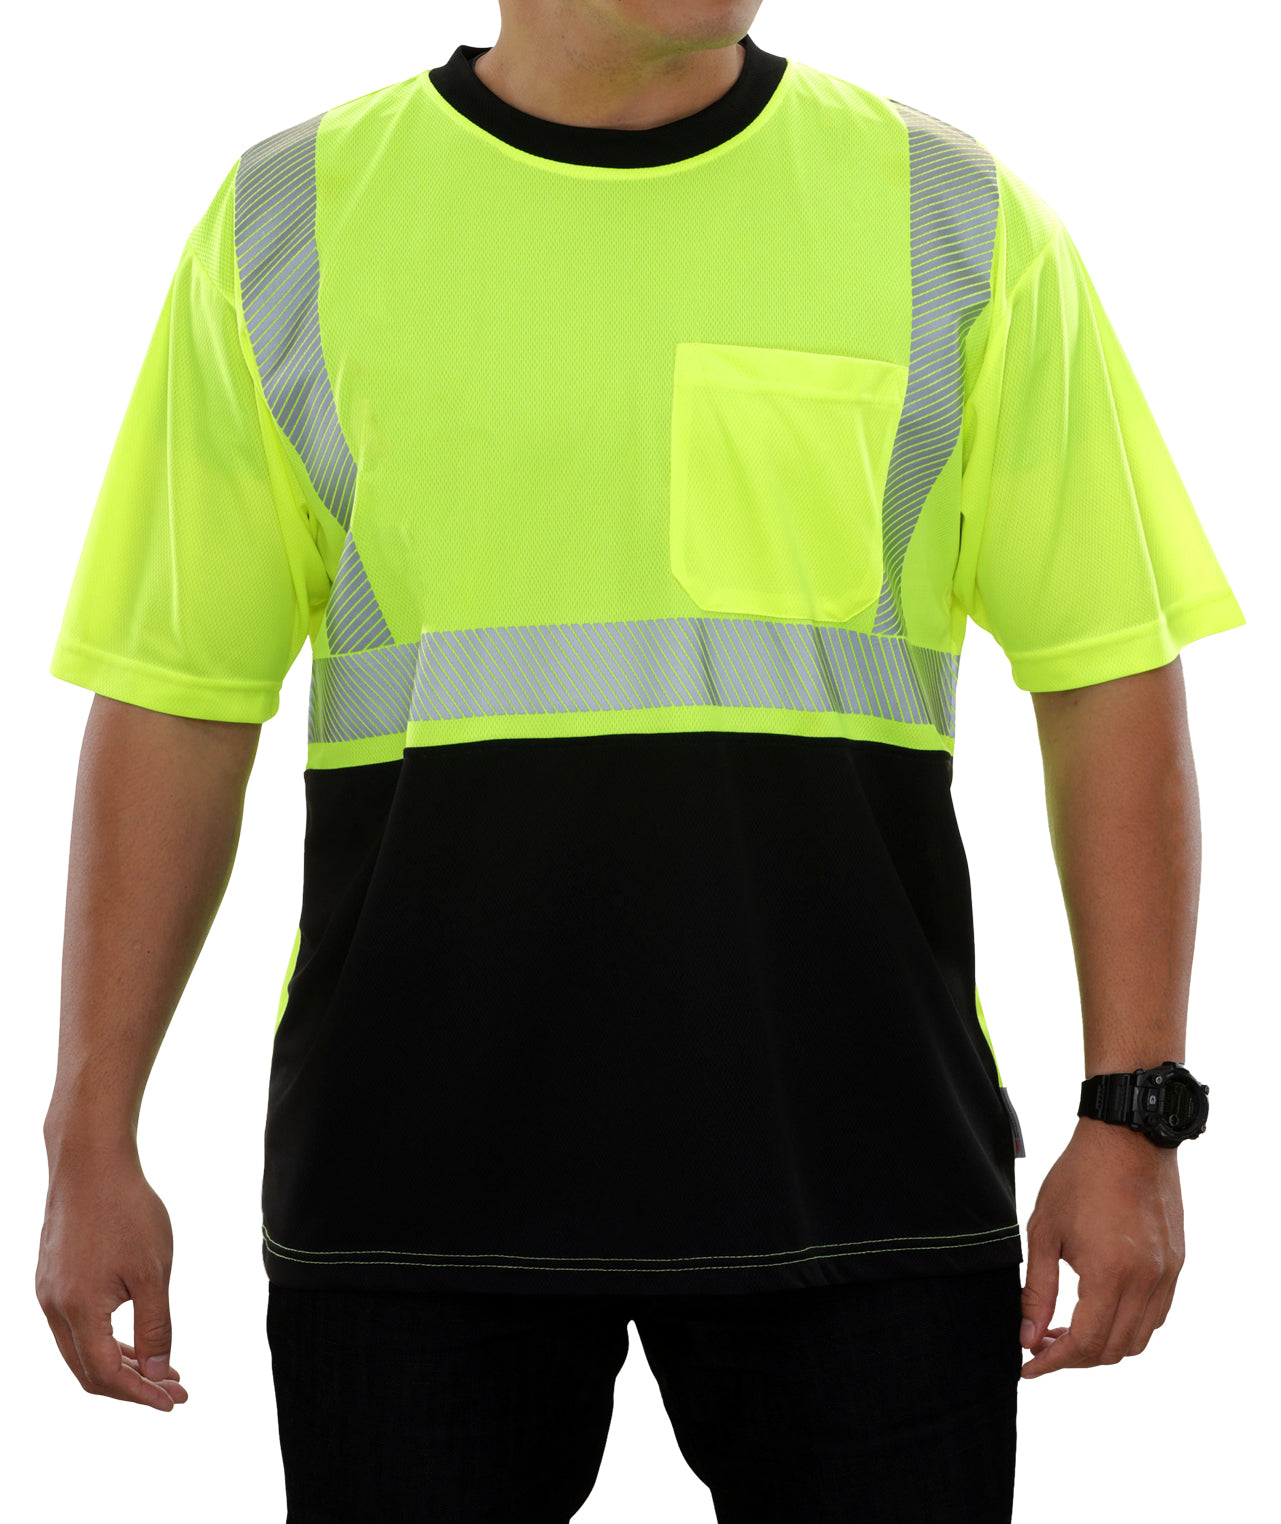 102CTLB Hi-Vis Two-Tone Birdseye Pocket Safety Shirt with Comfort Trim by 3MTM